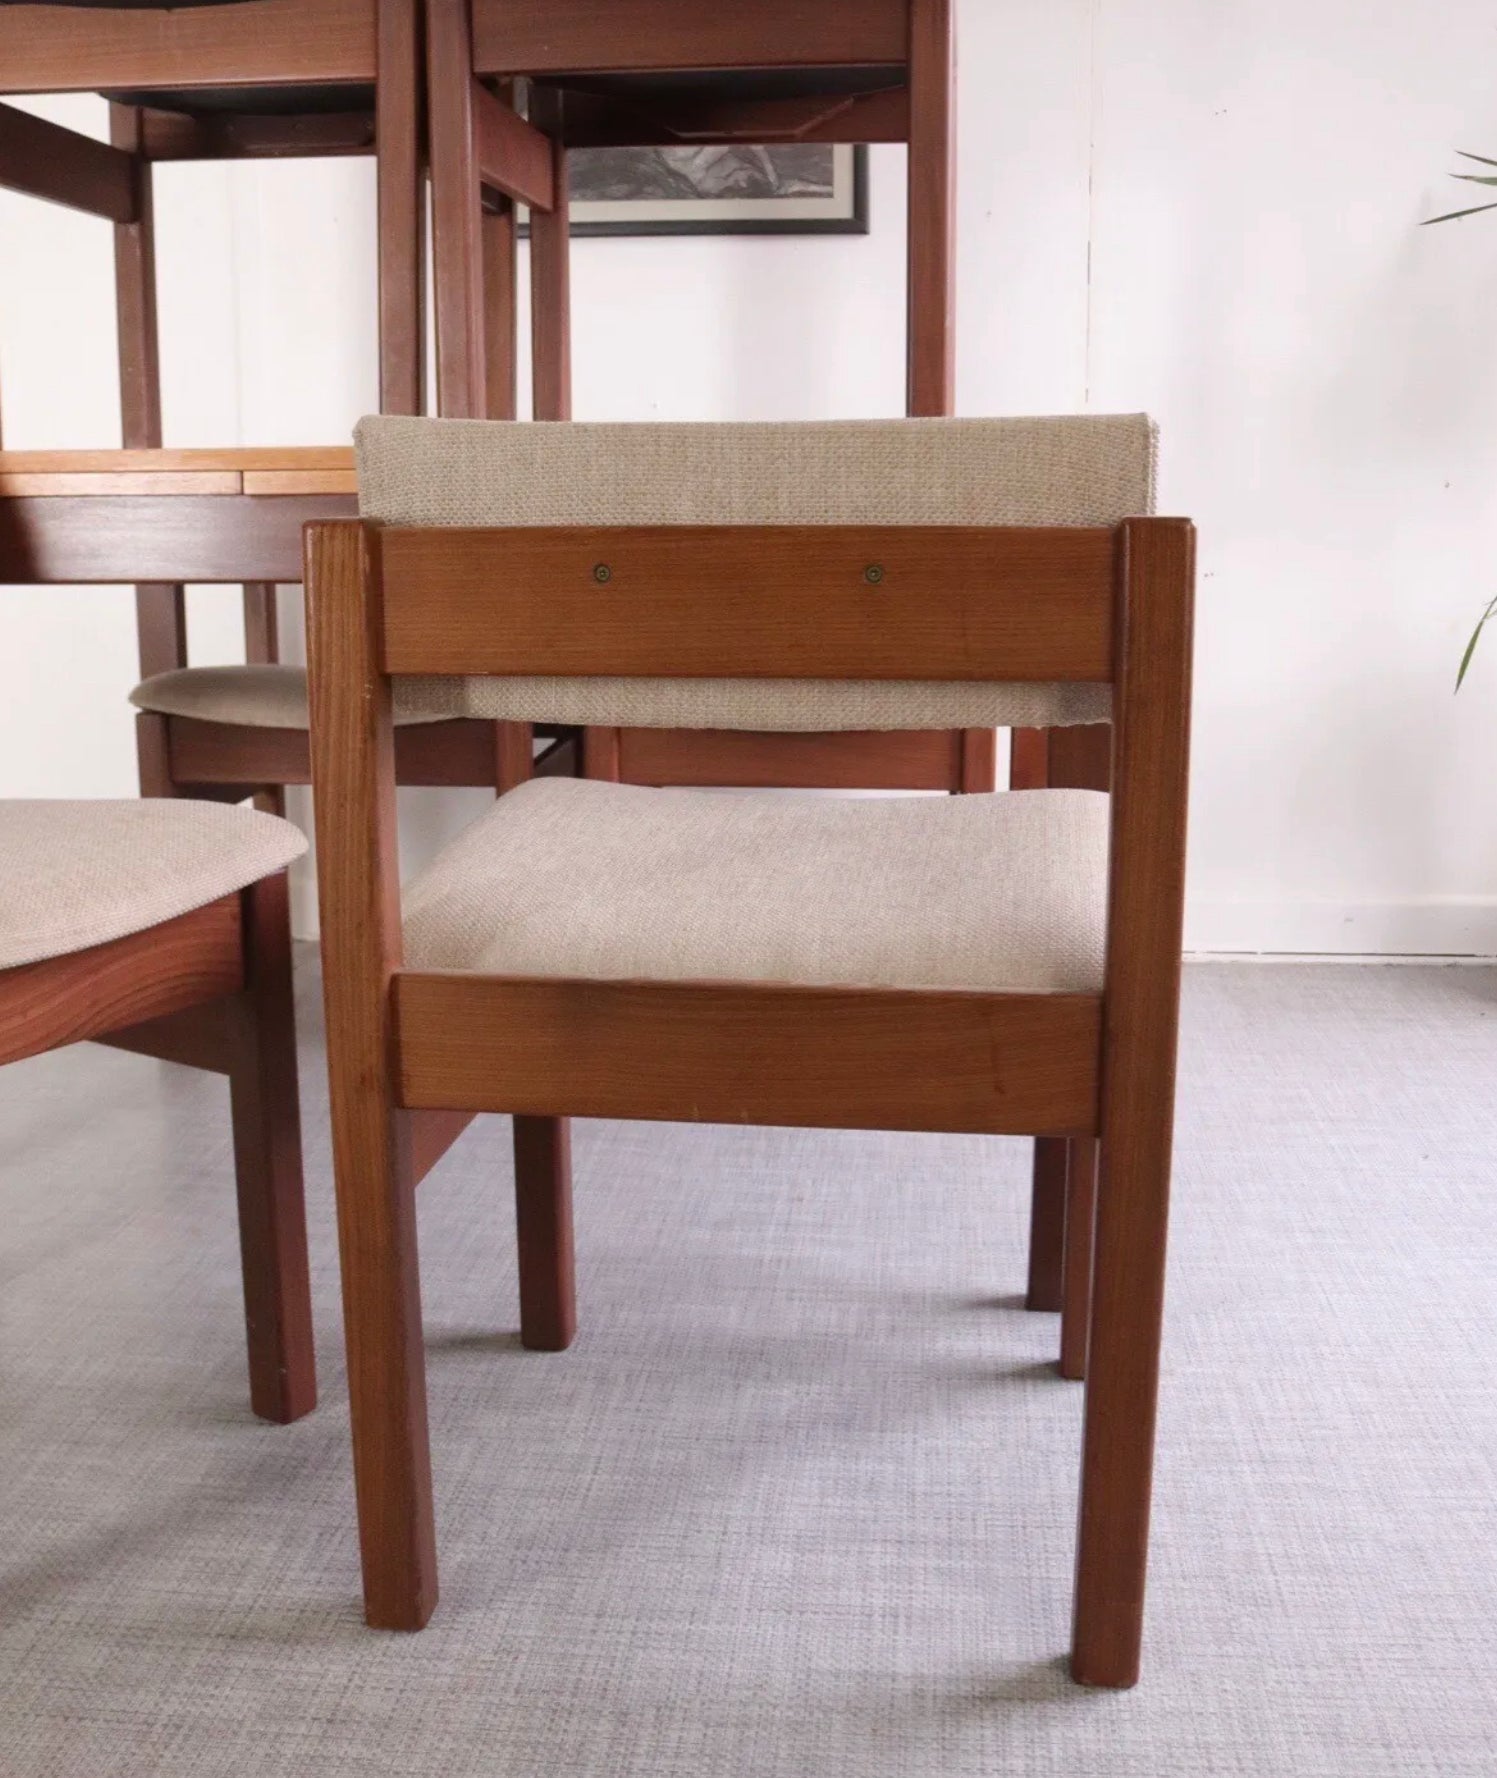 Teak GR69 Rare Gordon Russell Dining Set Table And 6 Chairs Mid Century 60s - teakyfinders